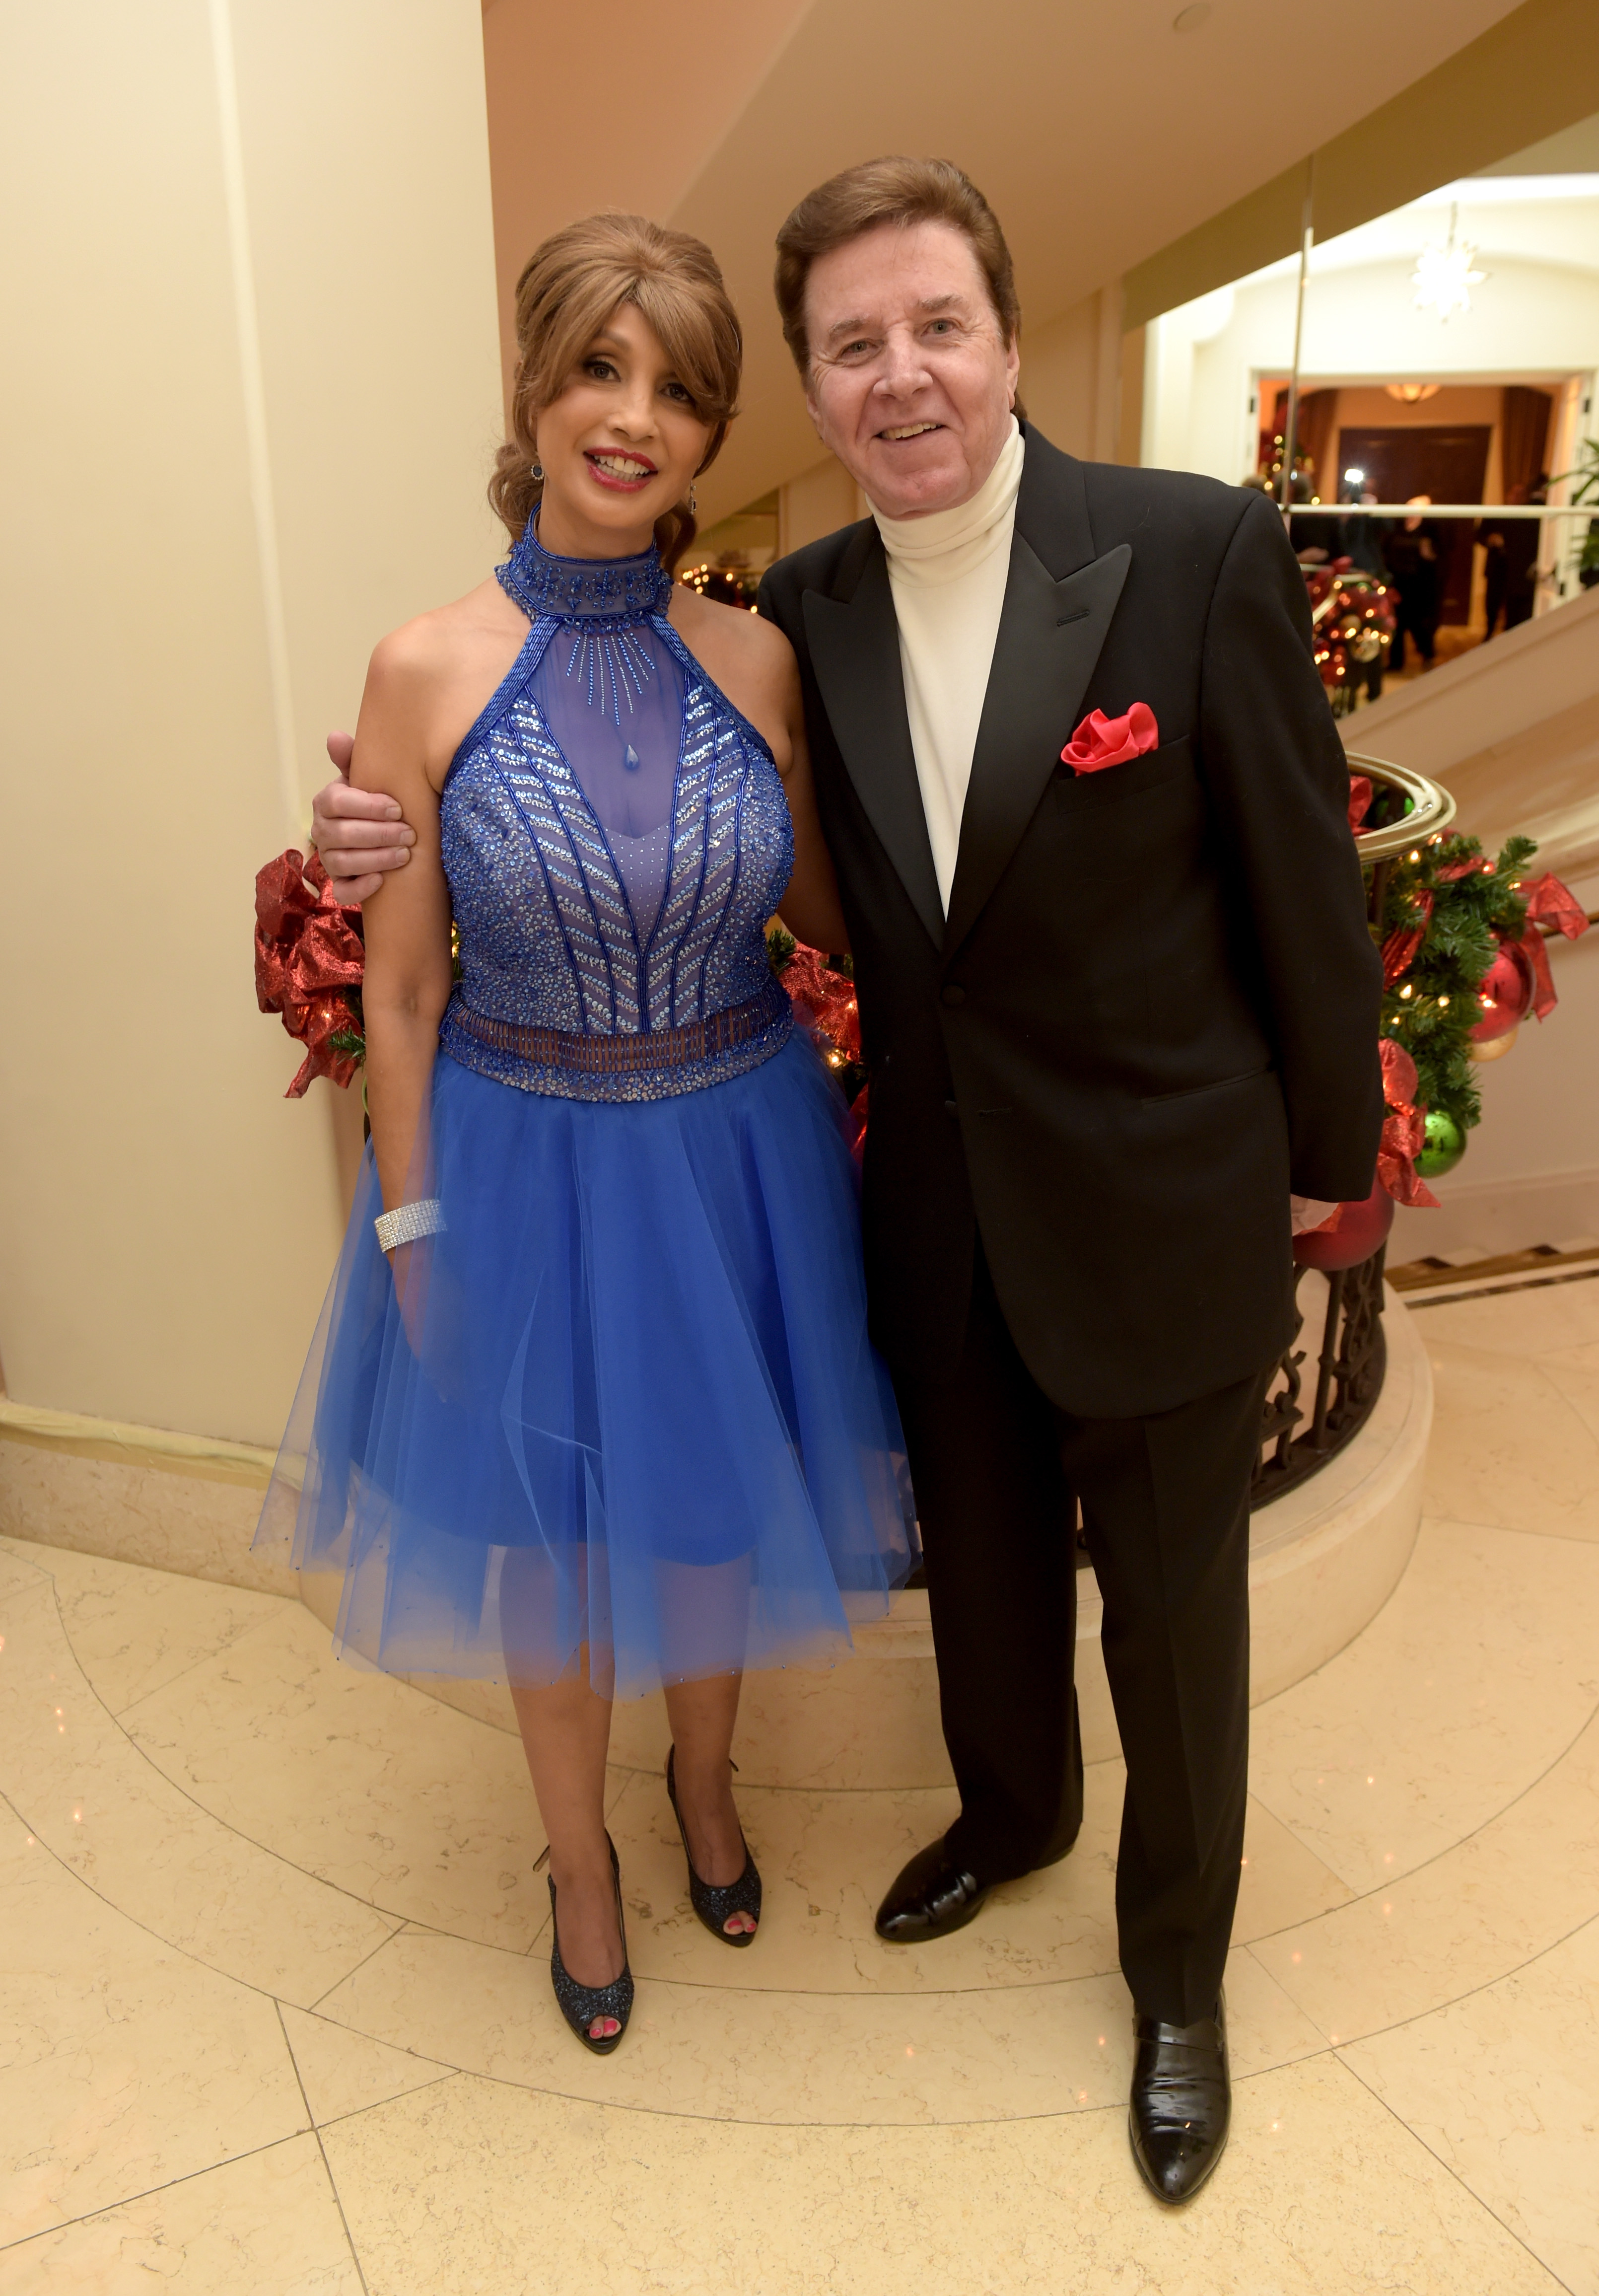 Brigitte and Bobby Sherman at the Brigitte and Bobby Sherman Children's Foundation's 6th Annual Christmas Gala and Fundraiser on December 19, 2015, in Beverly Hills, California | Source: Getty Images